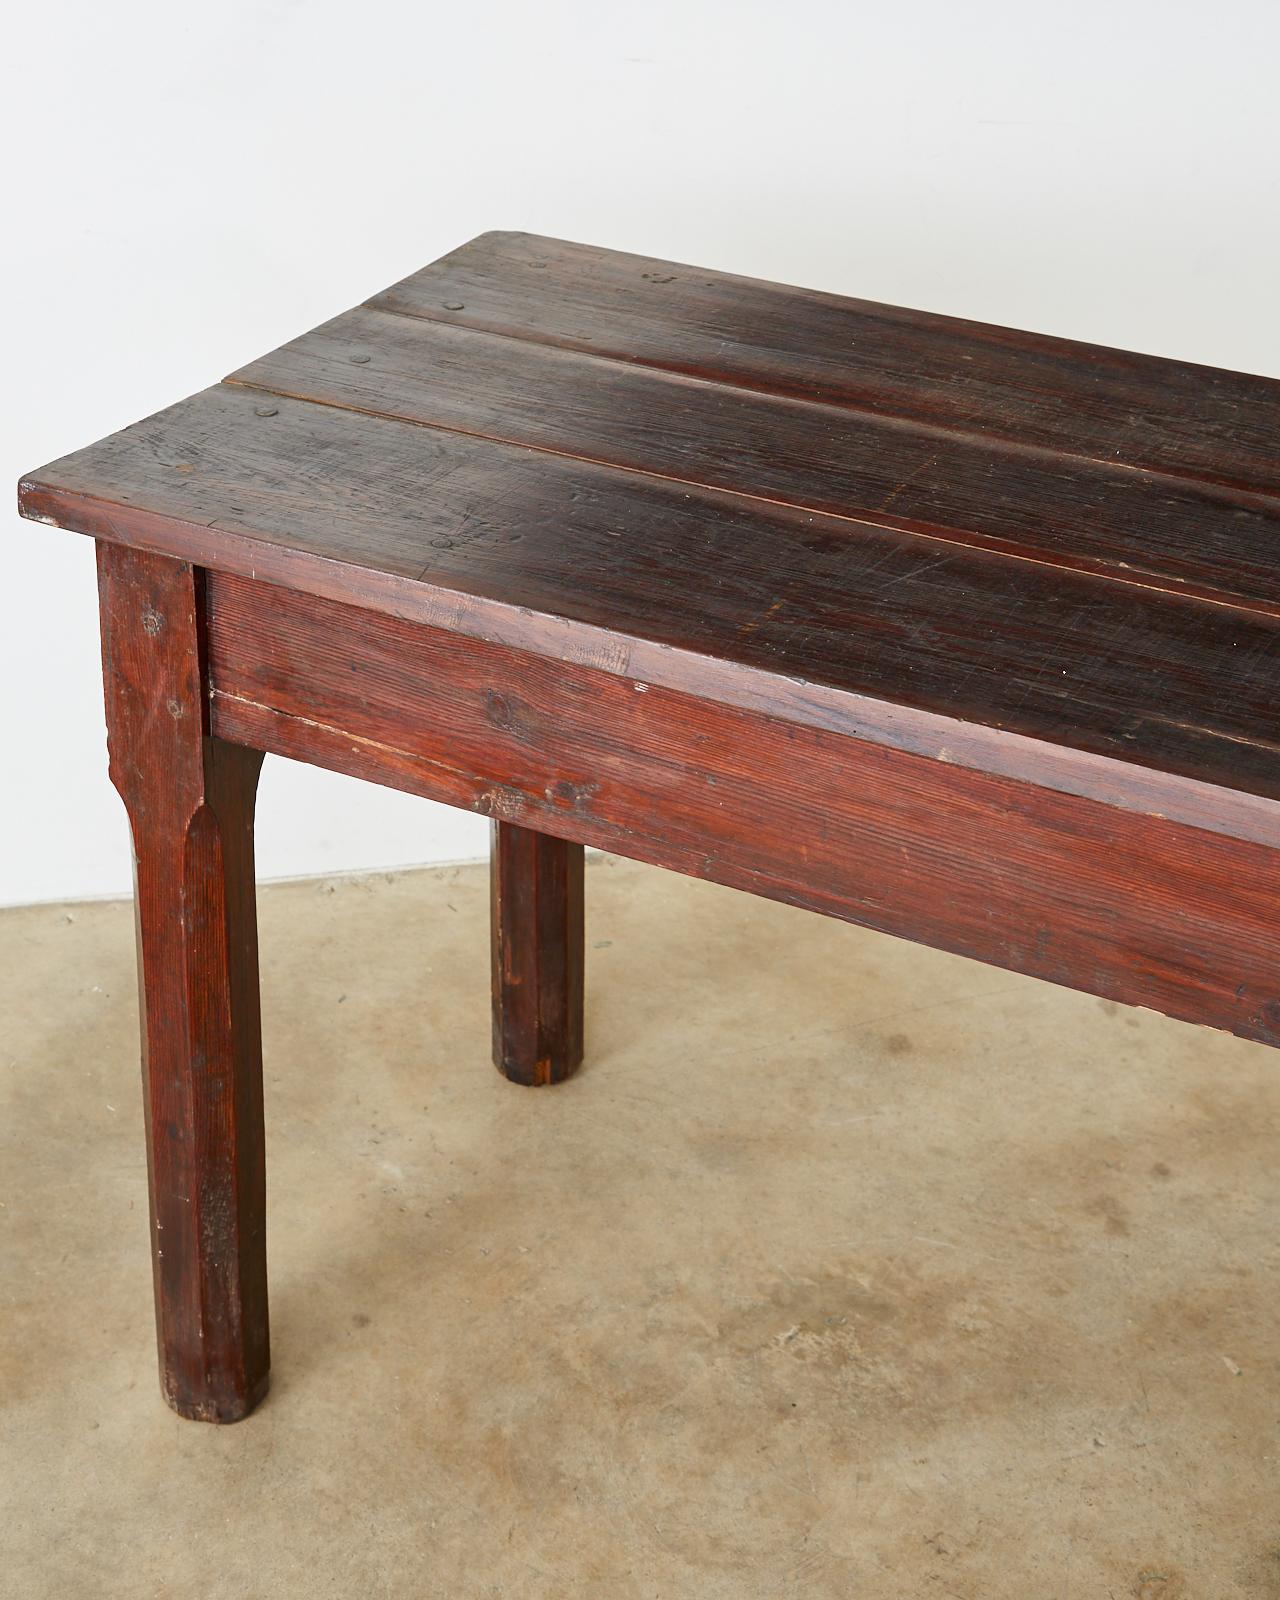 Hand-Crafted Rustic Italian Pine Farmhouse Dining Table or Console